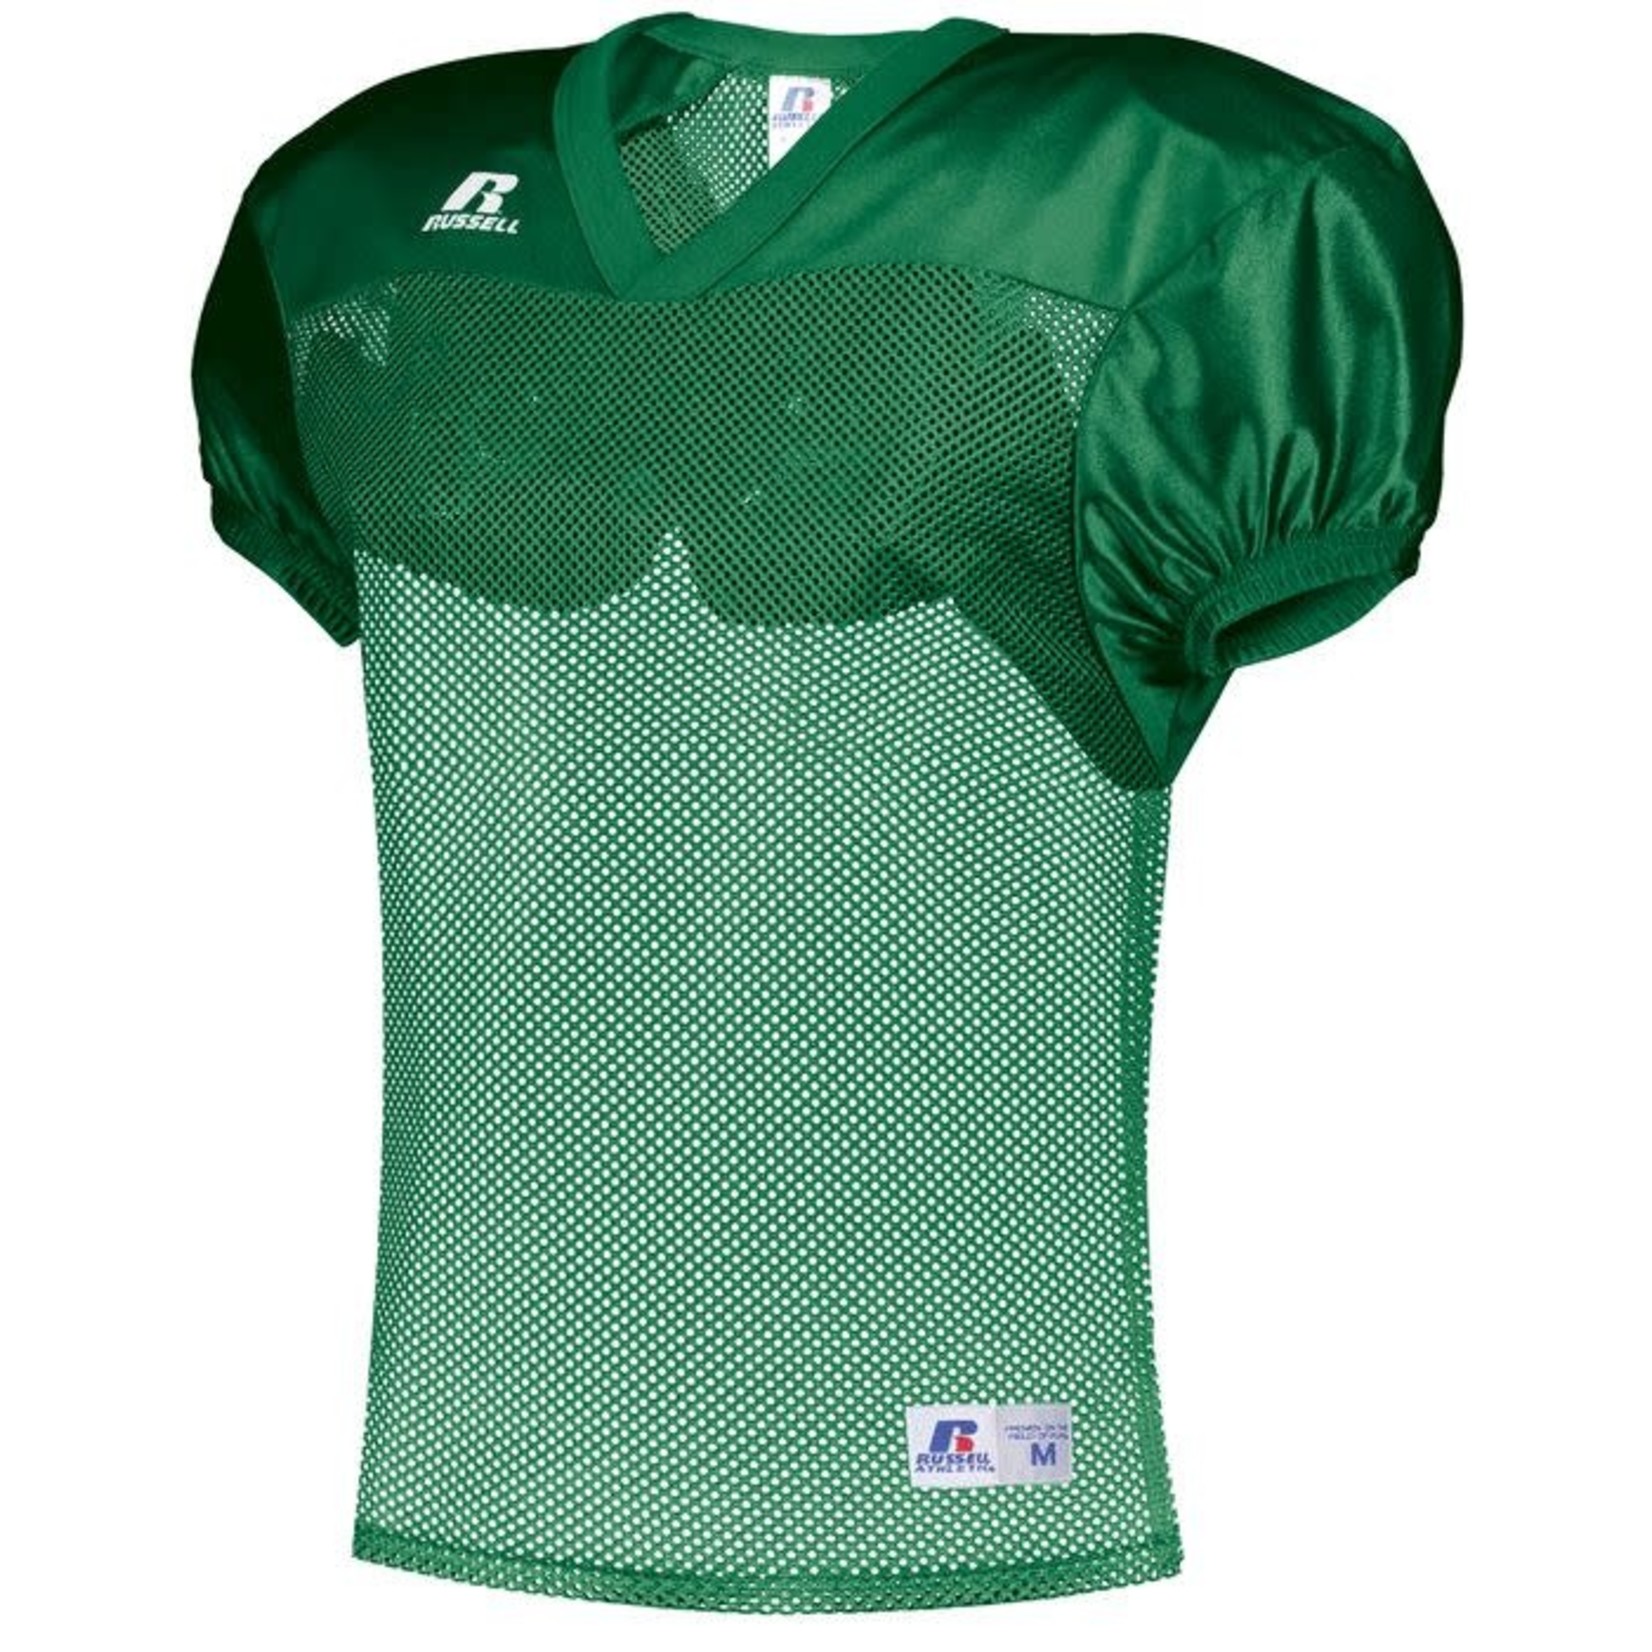 Russell Russell Practice Jersey